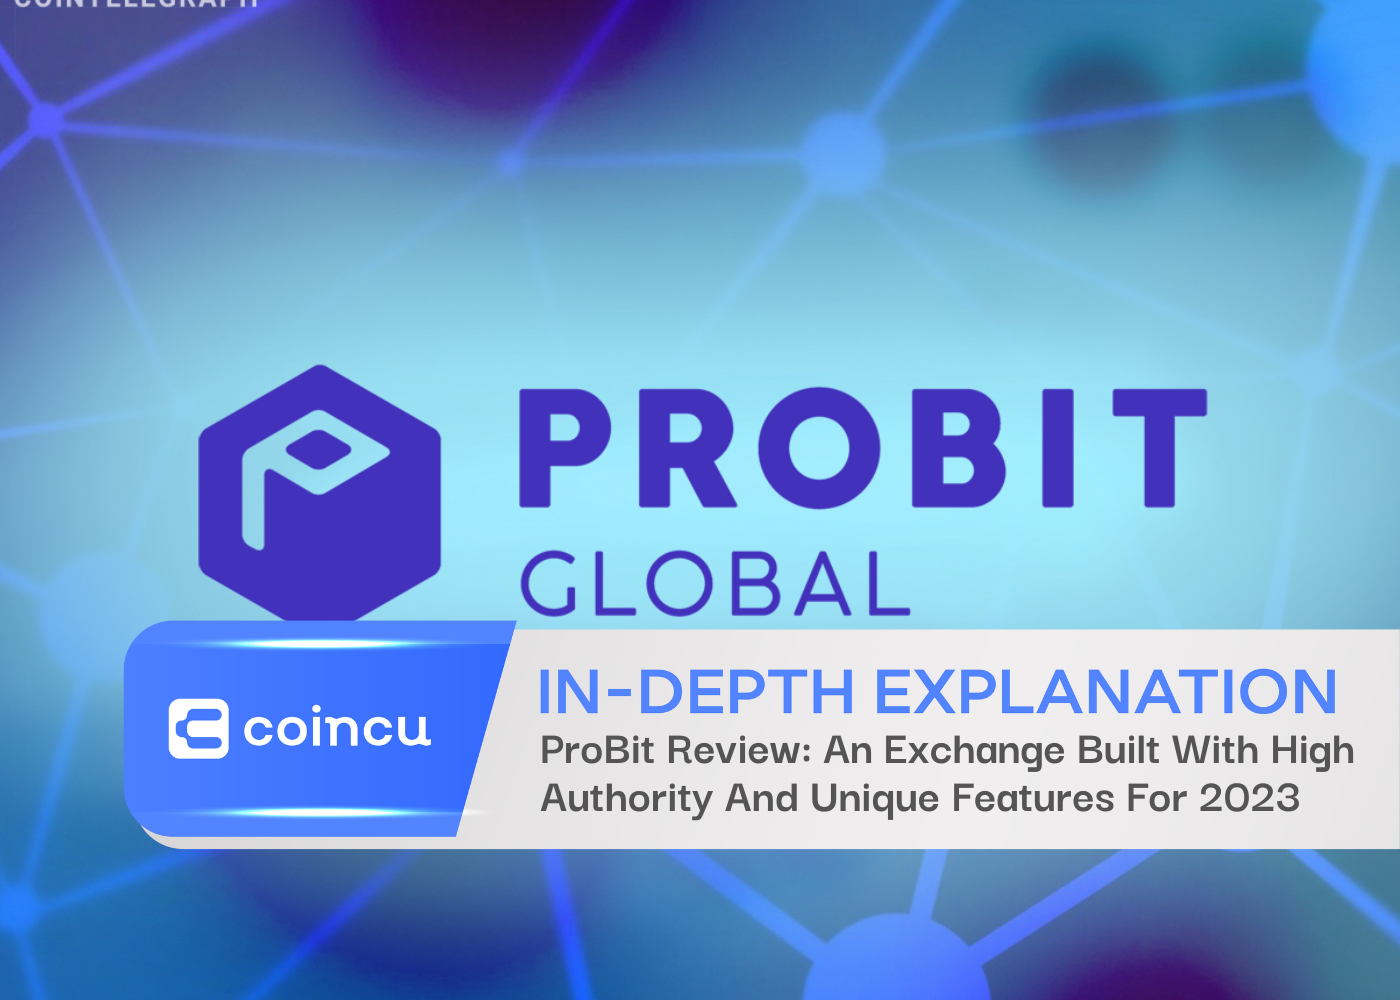 ProBit Review: An Exchange Built With High Authority And Unique Features For 2023